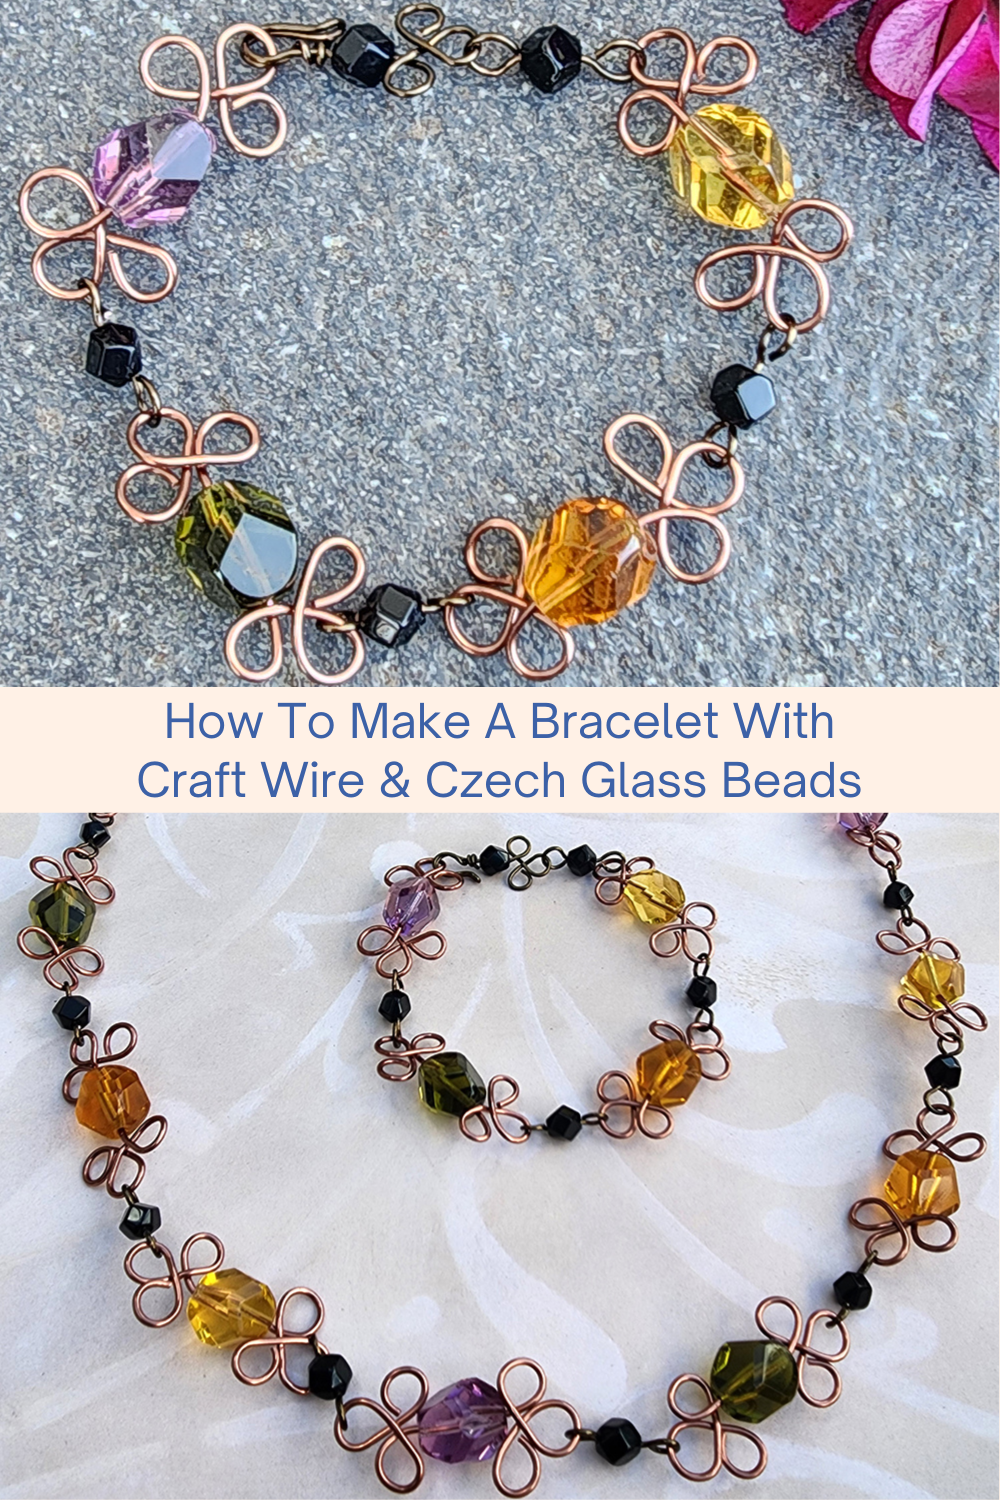 How To Make A Bracelet With Craft Wire & Czech Glass Beads Collage